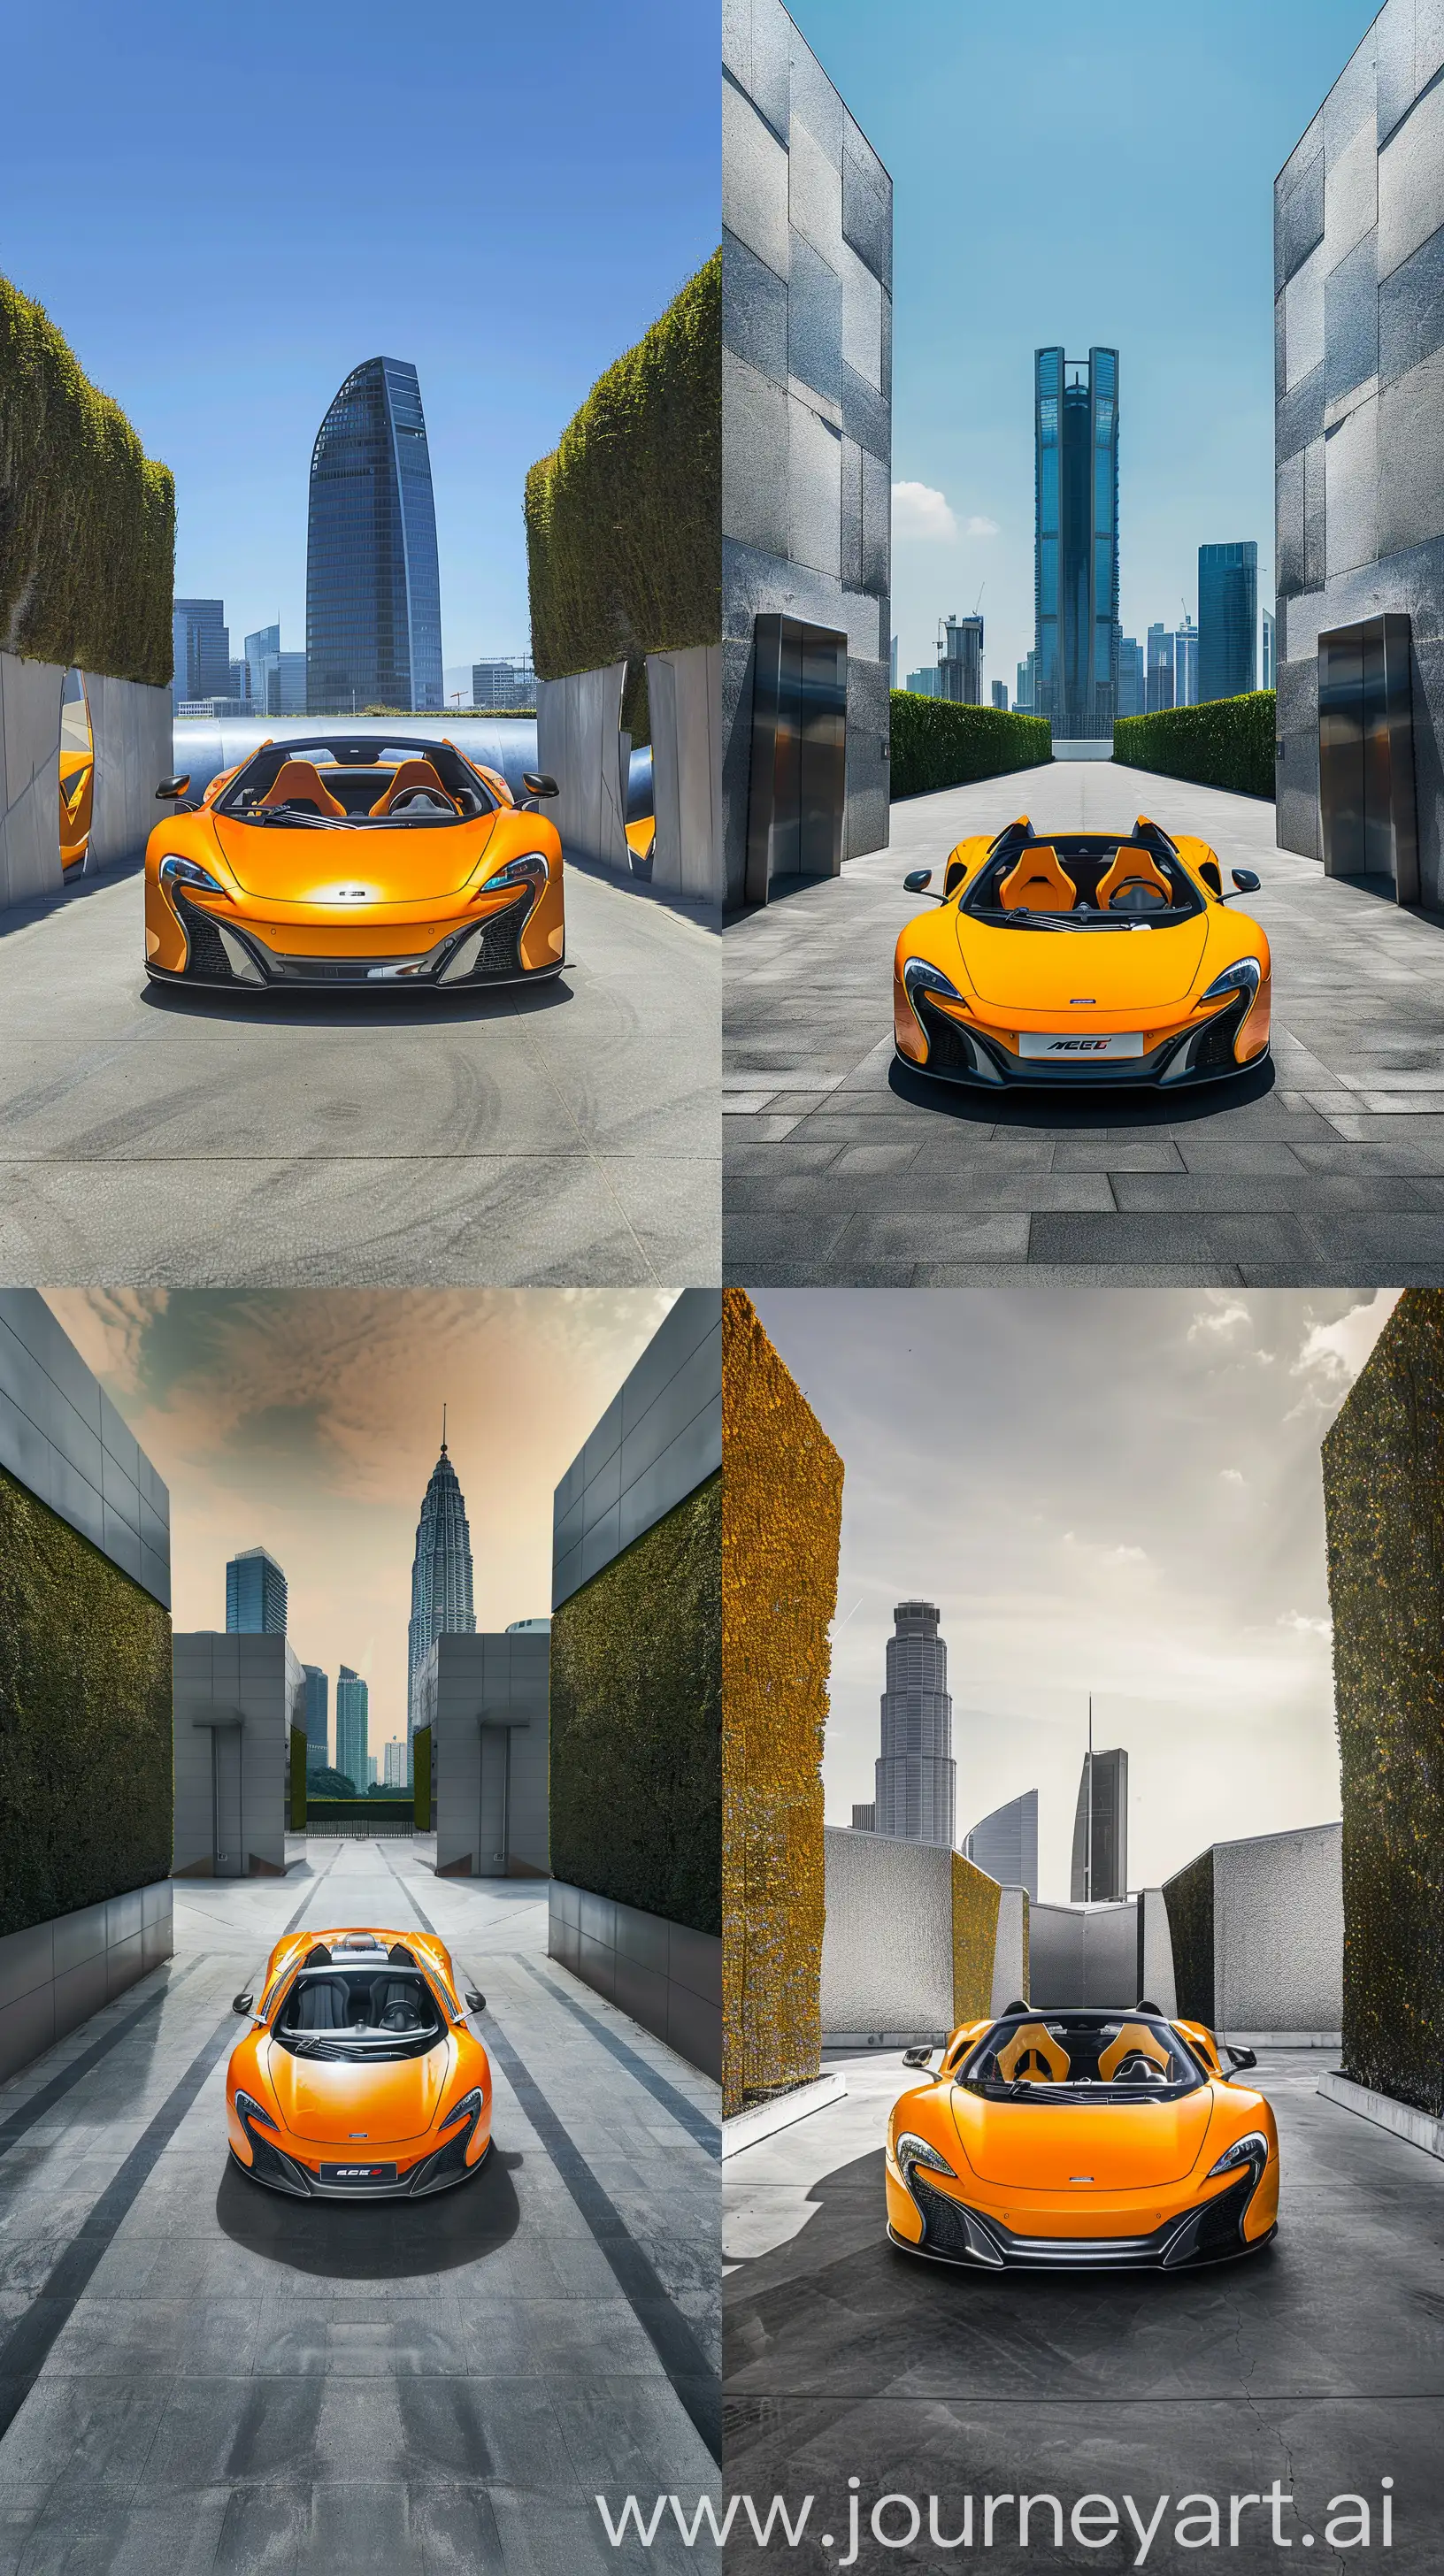 Futuristic-Urban-Landscape-with-McLaren-650s-Spider-and-Modern-Buildings